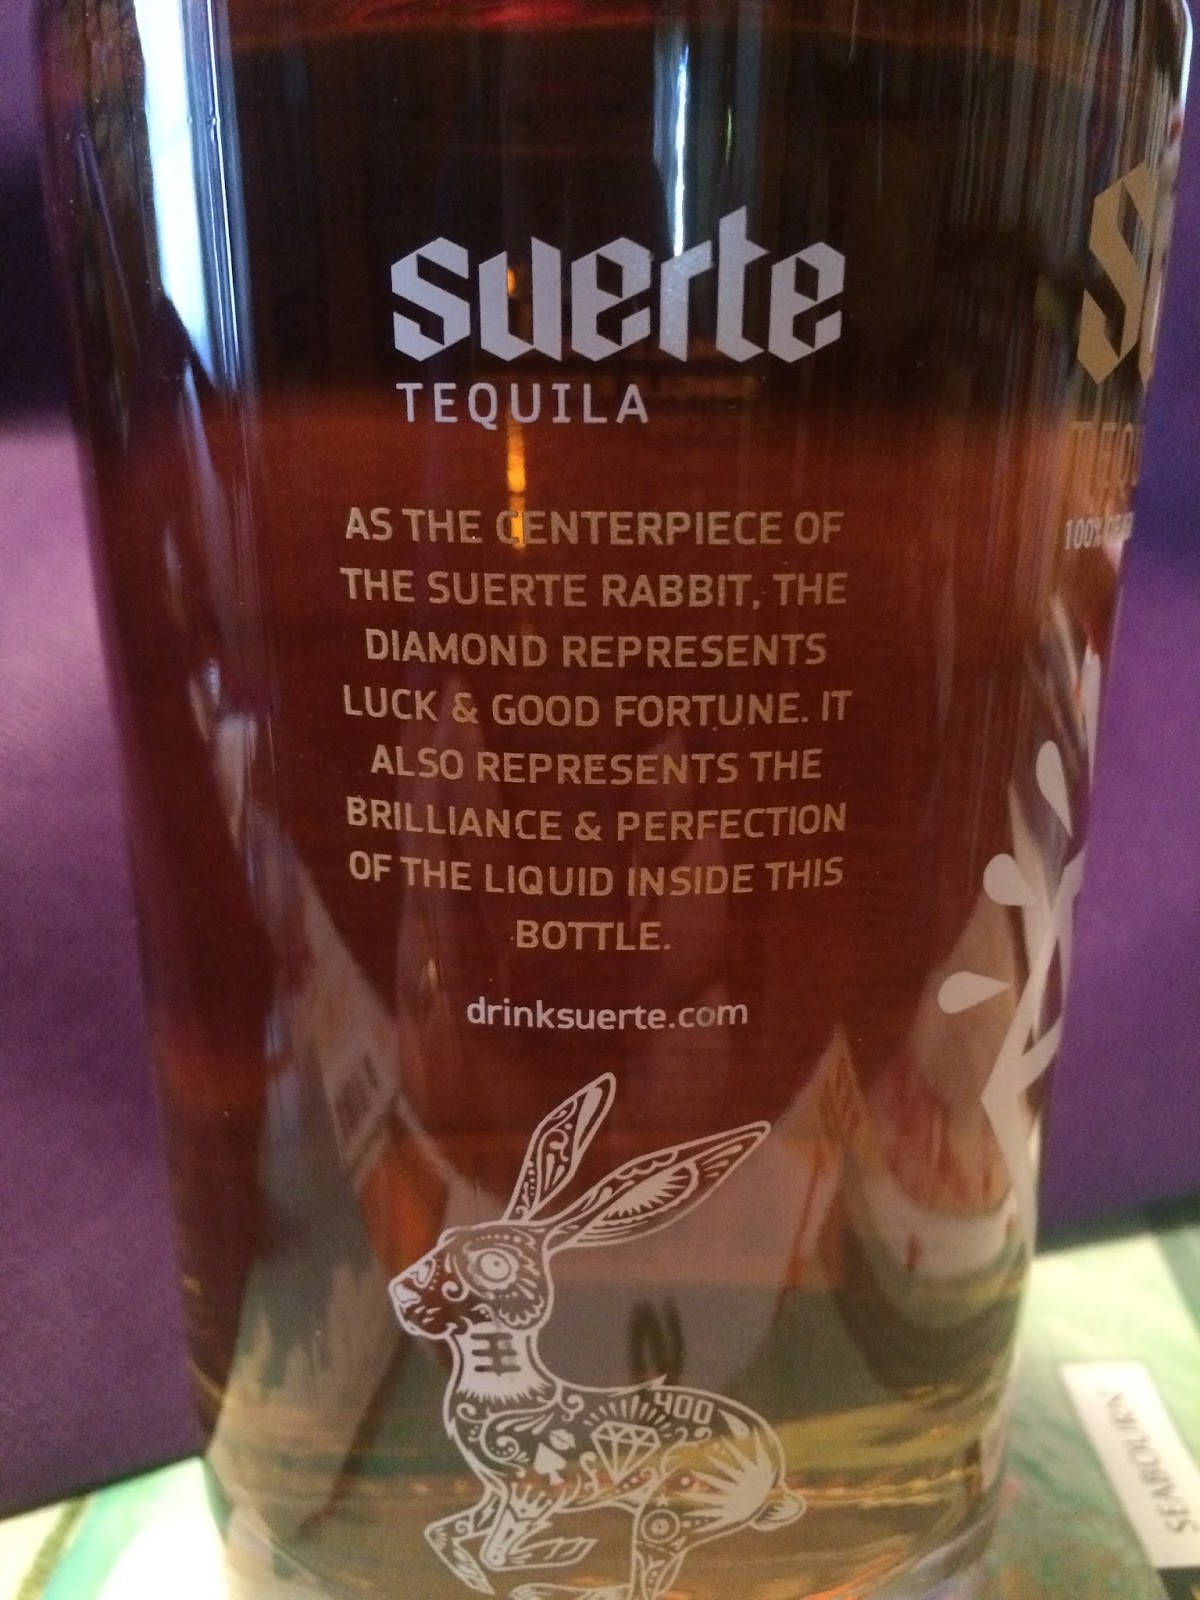 Lyckatequila Rabbit Logotyp (assuming This Is Referring To A Computer Or Mobile Wallpaper Featuring The Suerte Tequila Rabbit Logo) Wallpaper